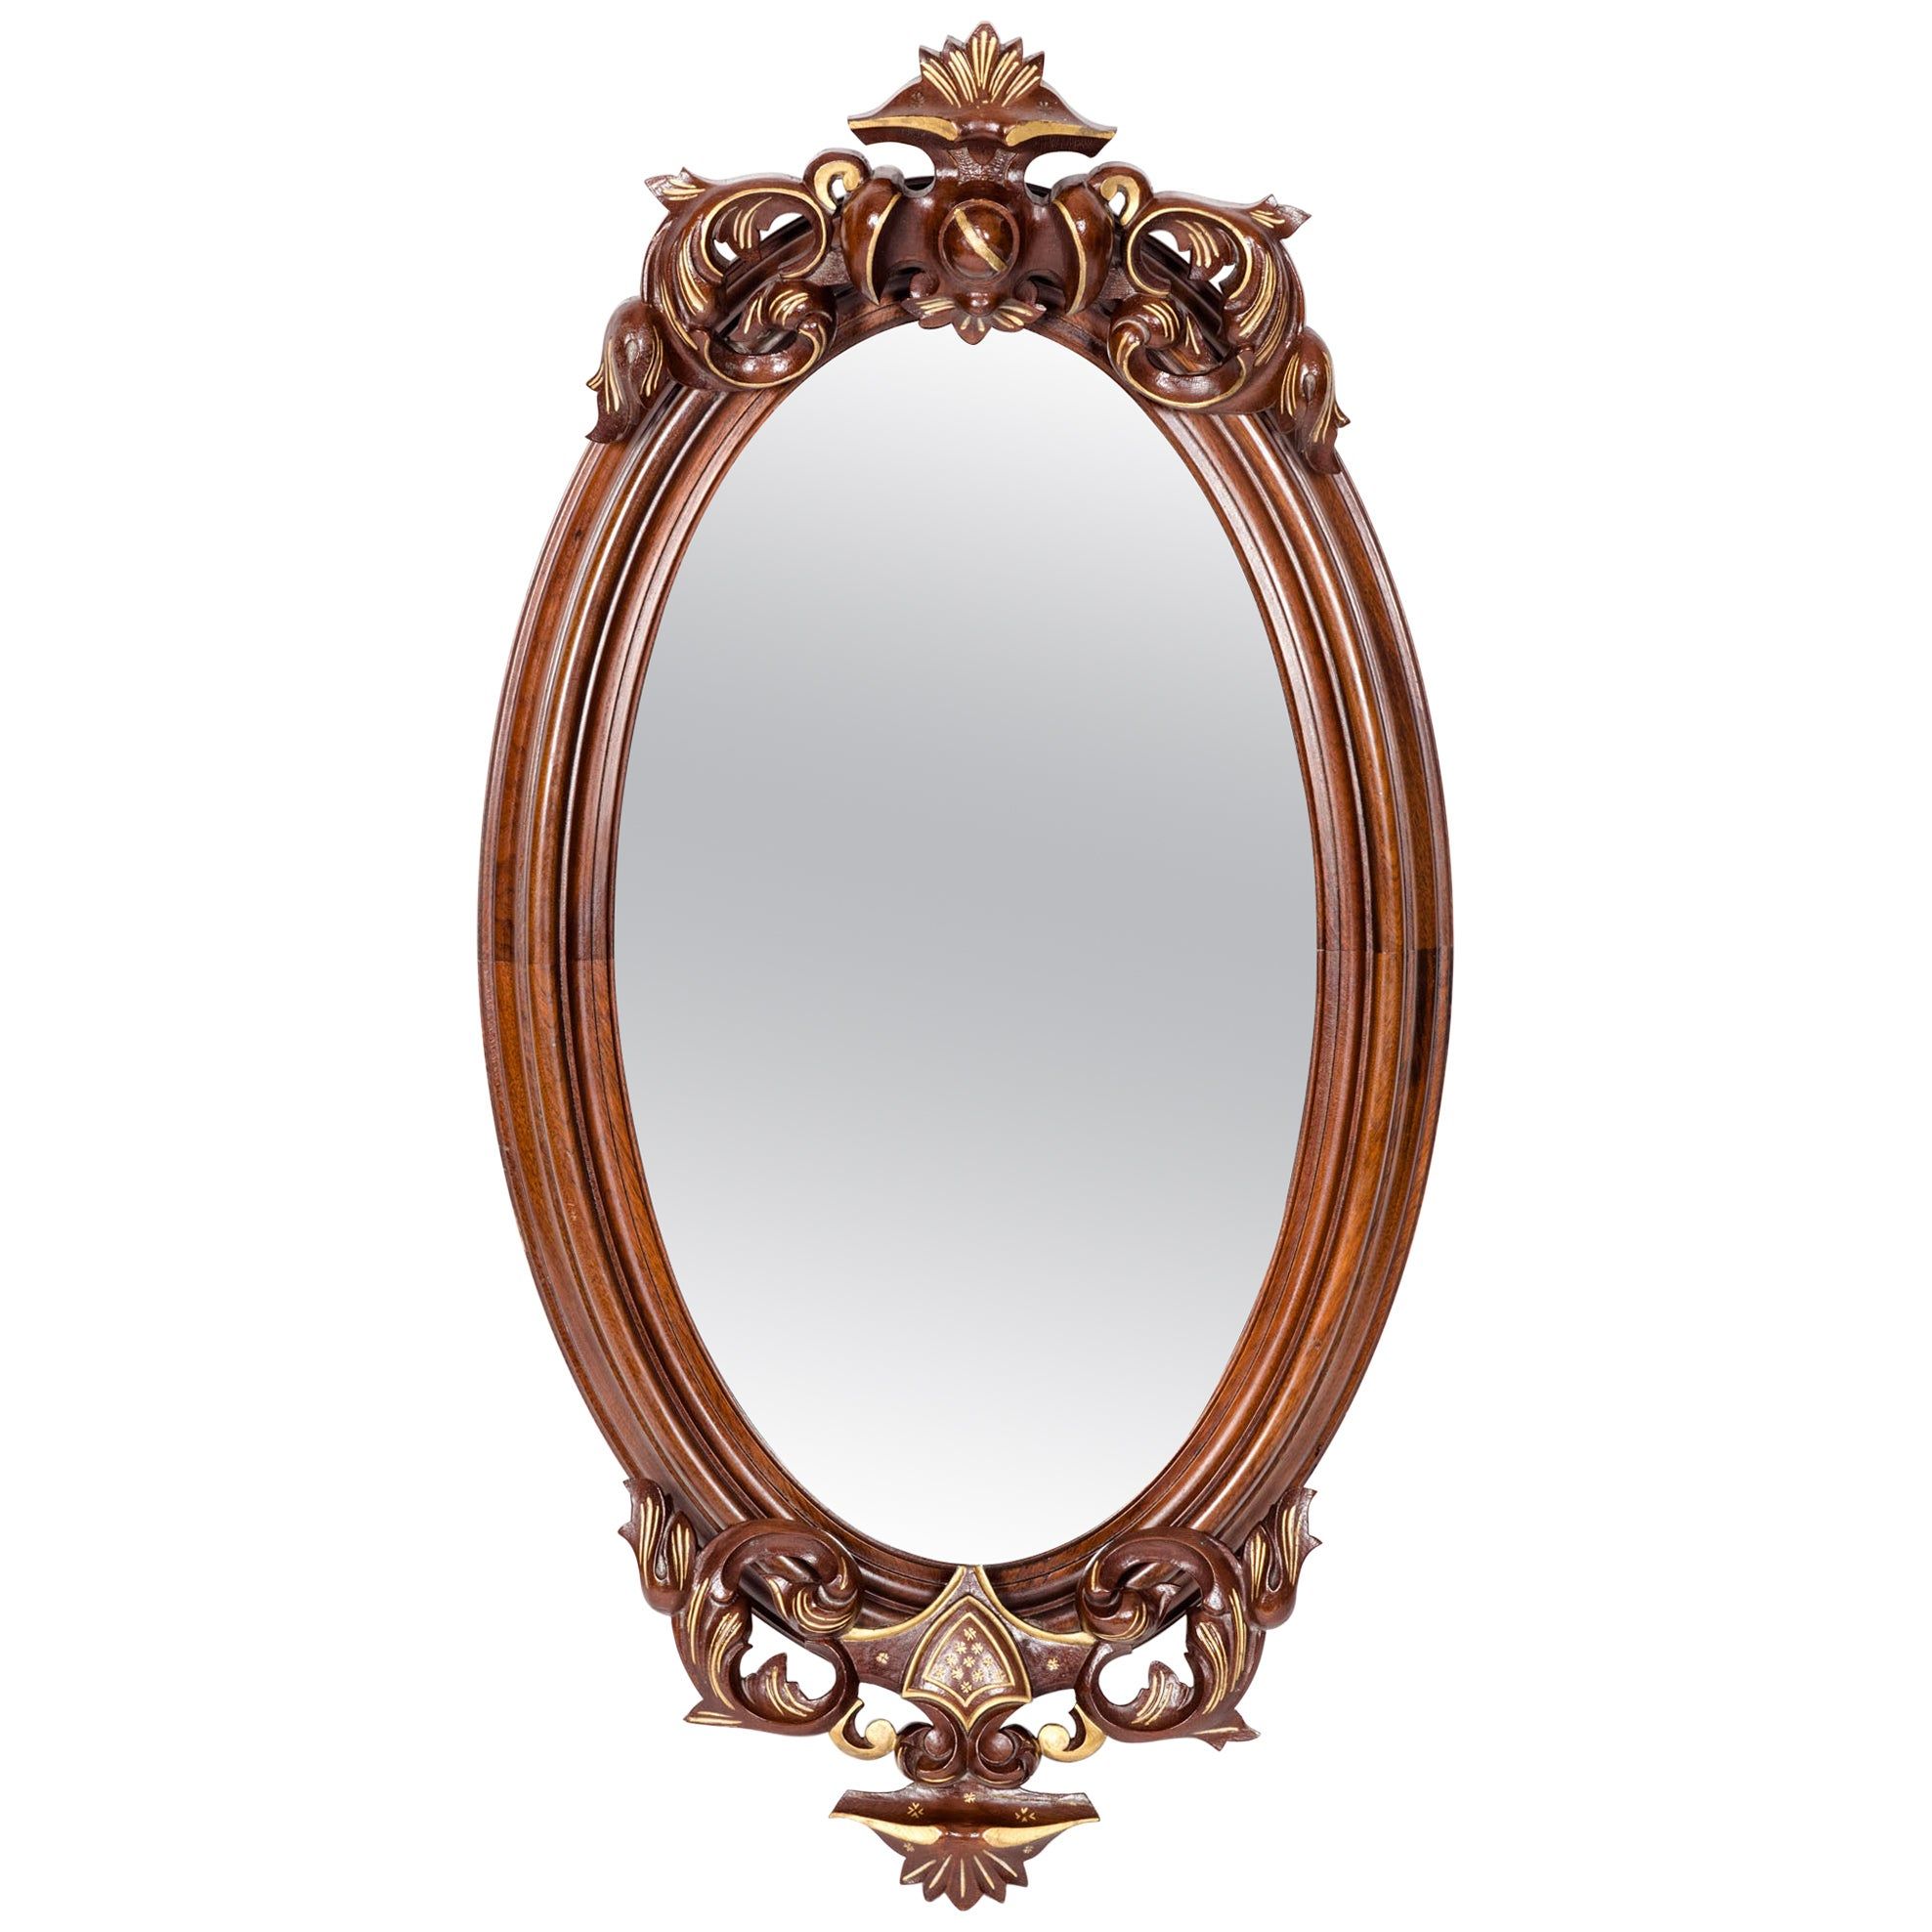 Highly Carved Mahogany Wood Framed Hanging Wall Mirror For Sale At 1stdibs Regarding Farmhouse Woodgrain And Leaf Accent Wall Mirrors (View 7 of 15)